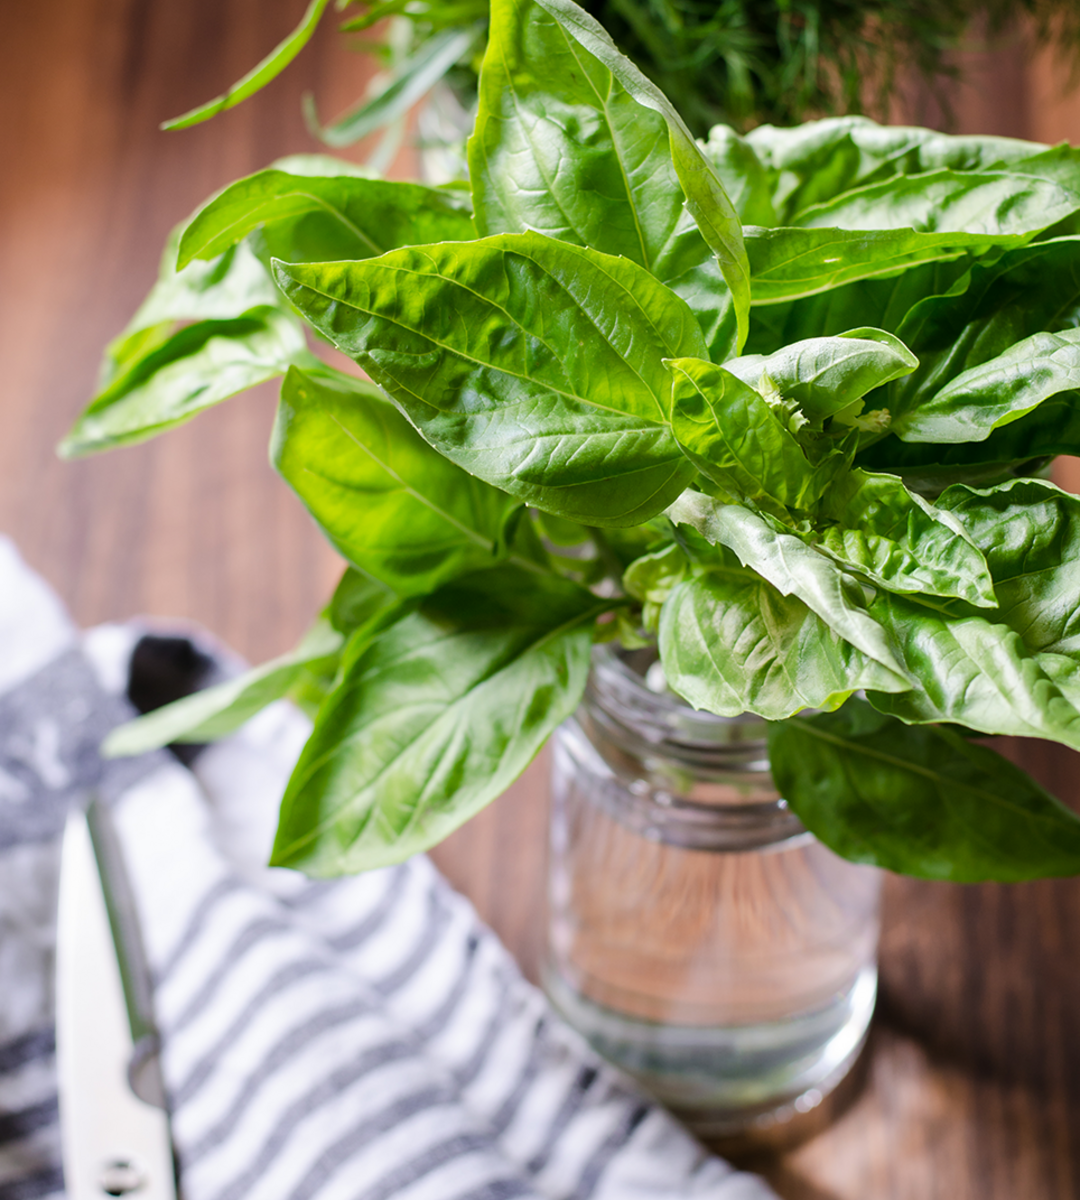 Storing and Preserving Hydroponic Basil